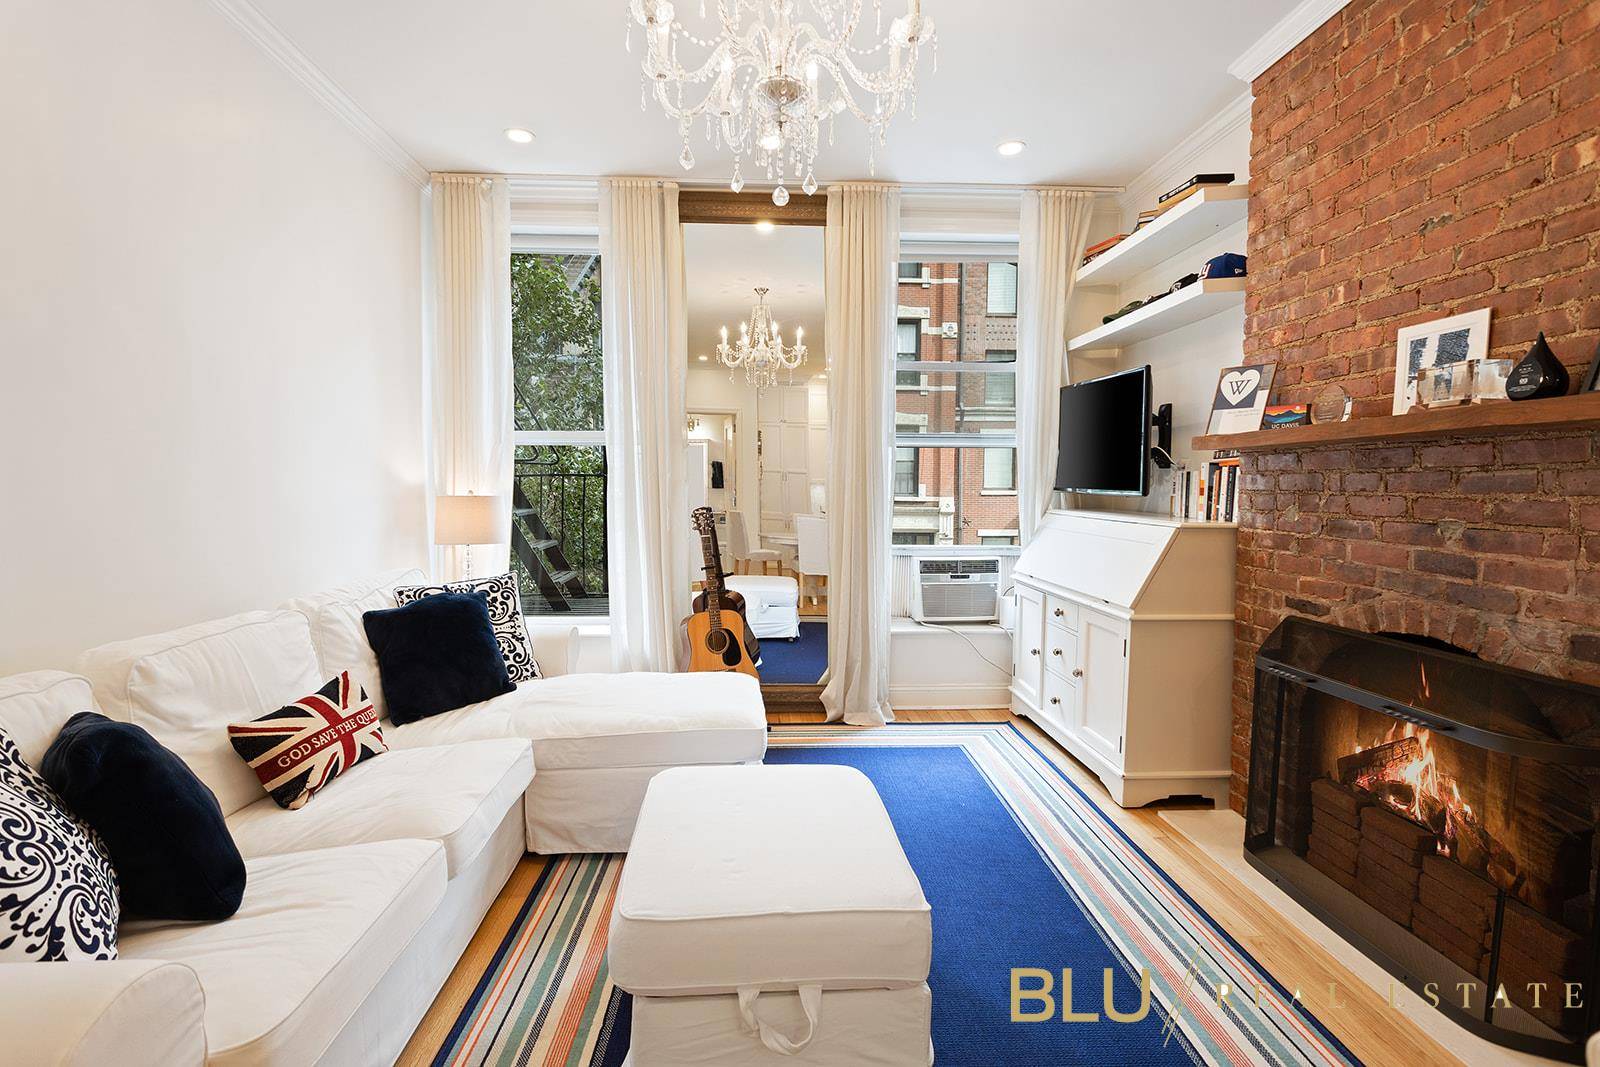 This gut renovated one bedroom one bathroom in the heart of Chelsea is your next dream home.